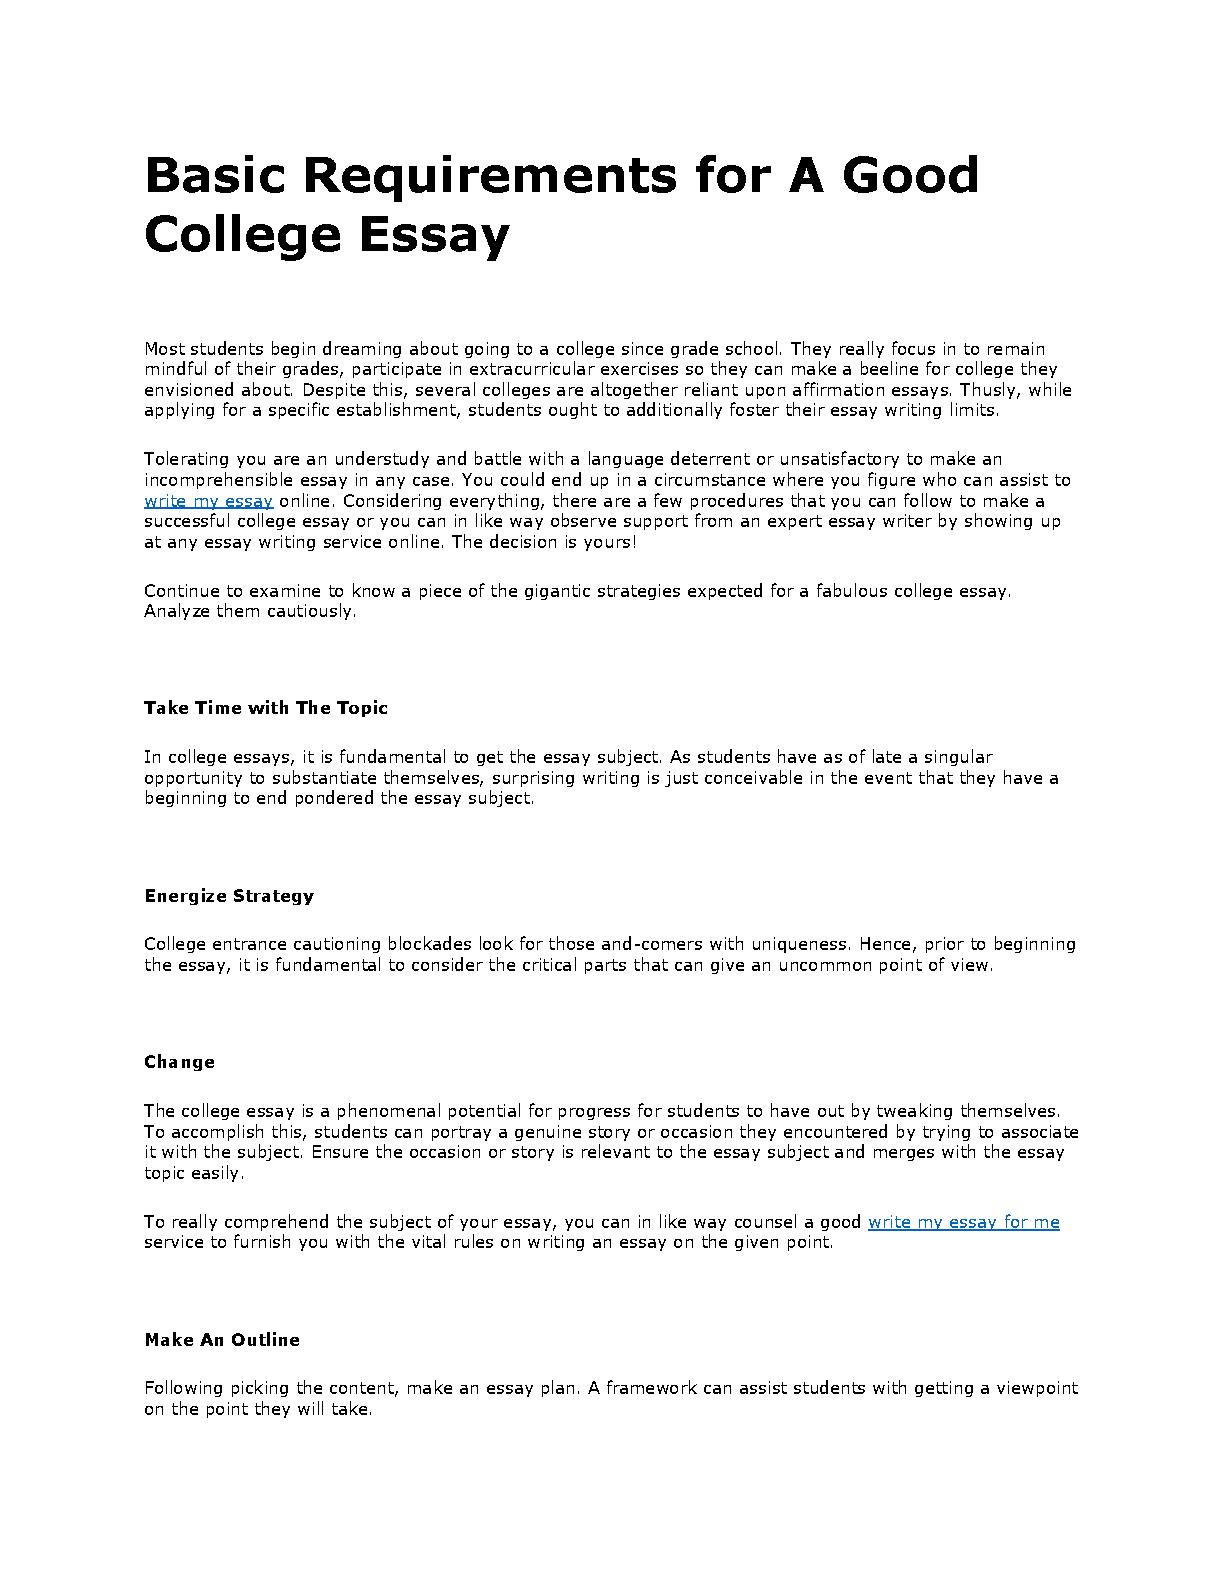 can a good college essay get you in reddit